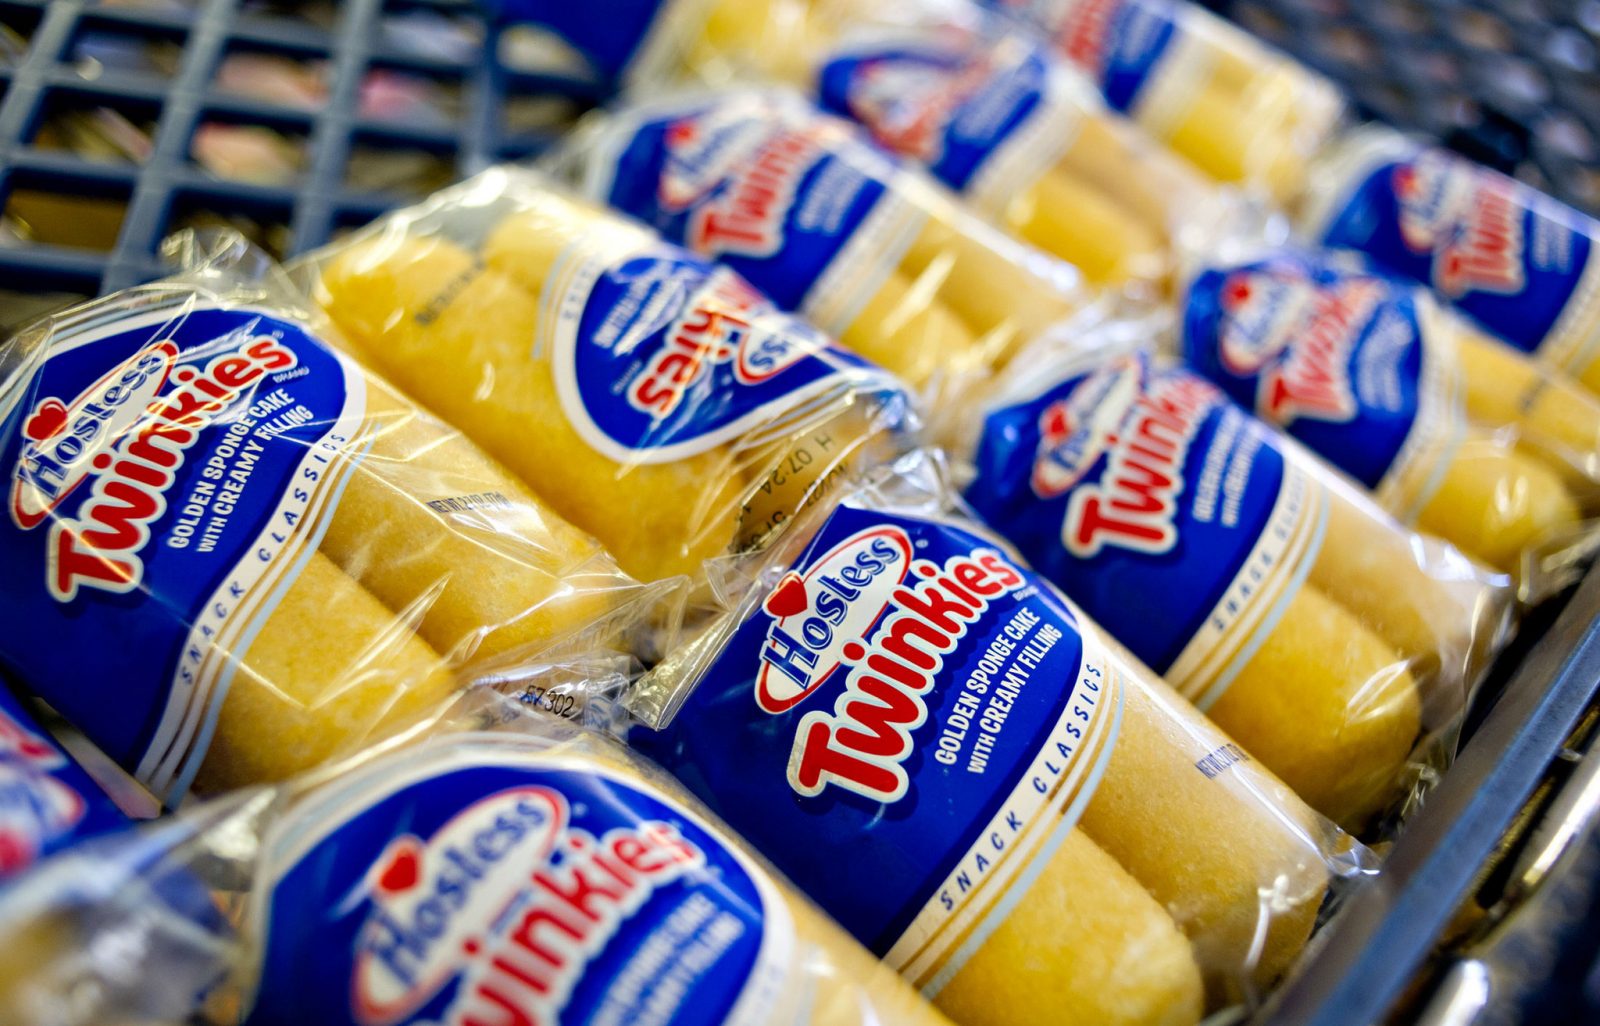 Nobody Has Scored at Least 17/20 on This General Knowledge Quiz. Will You? Twinkies